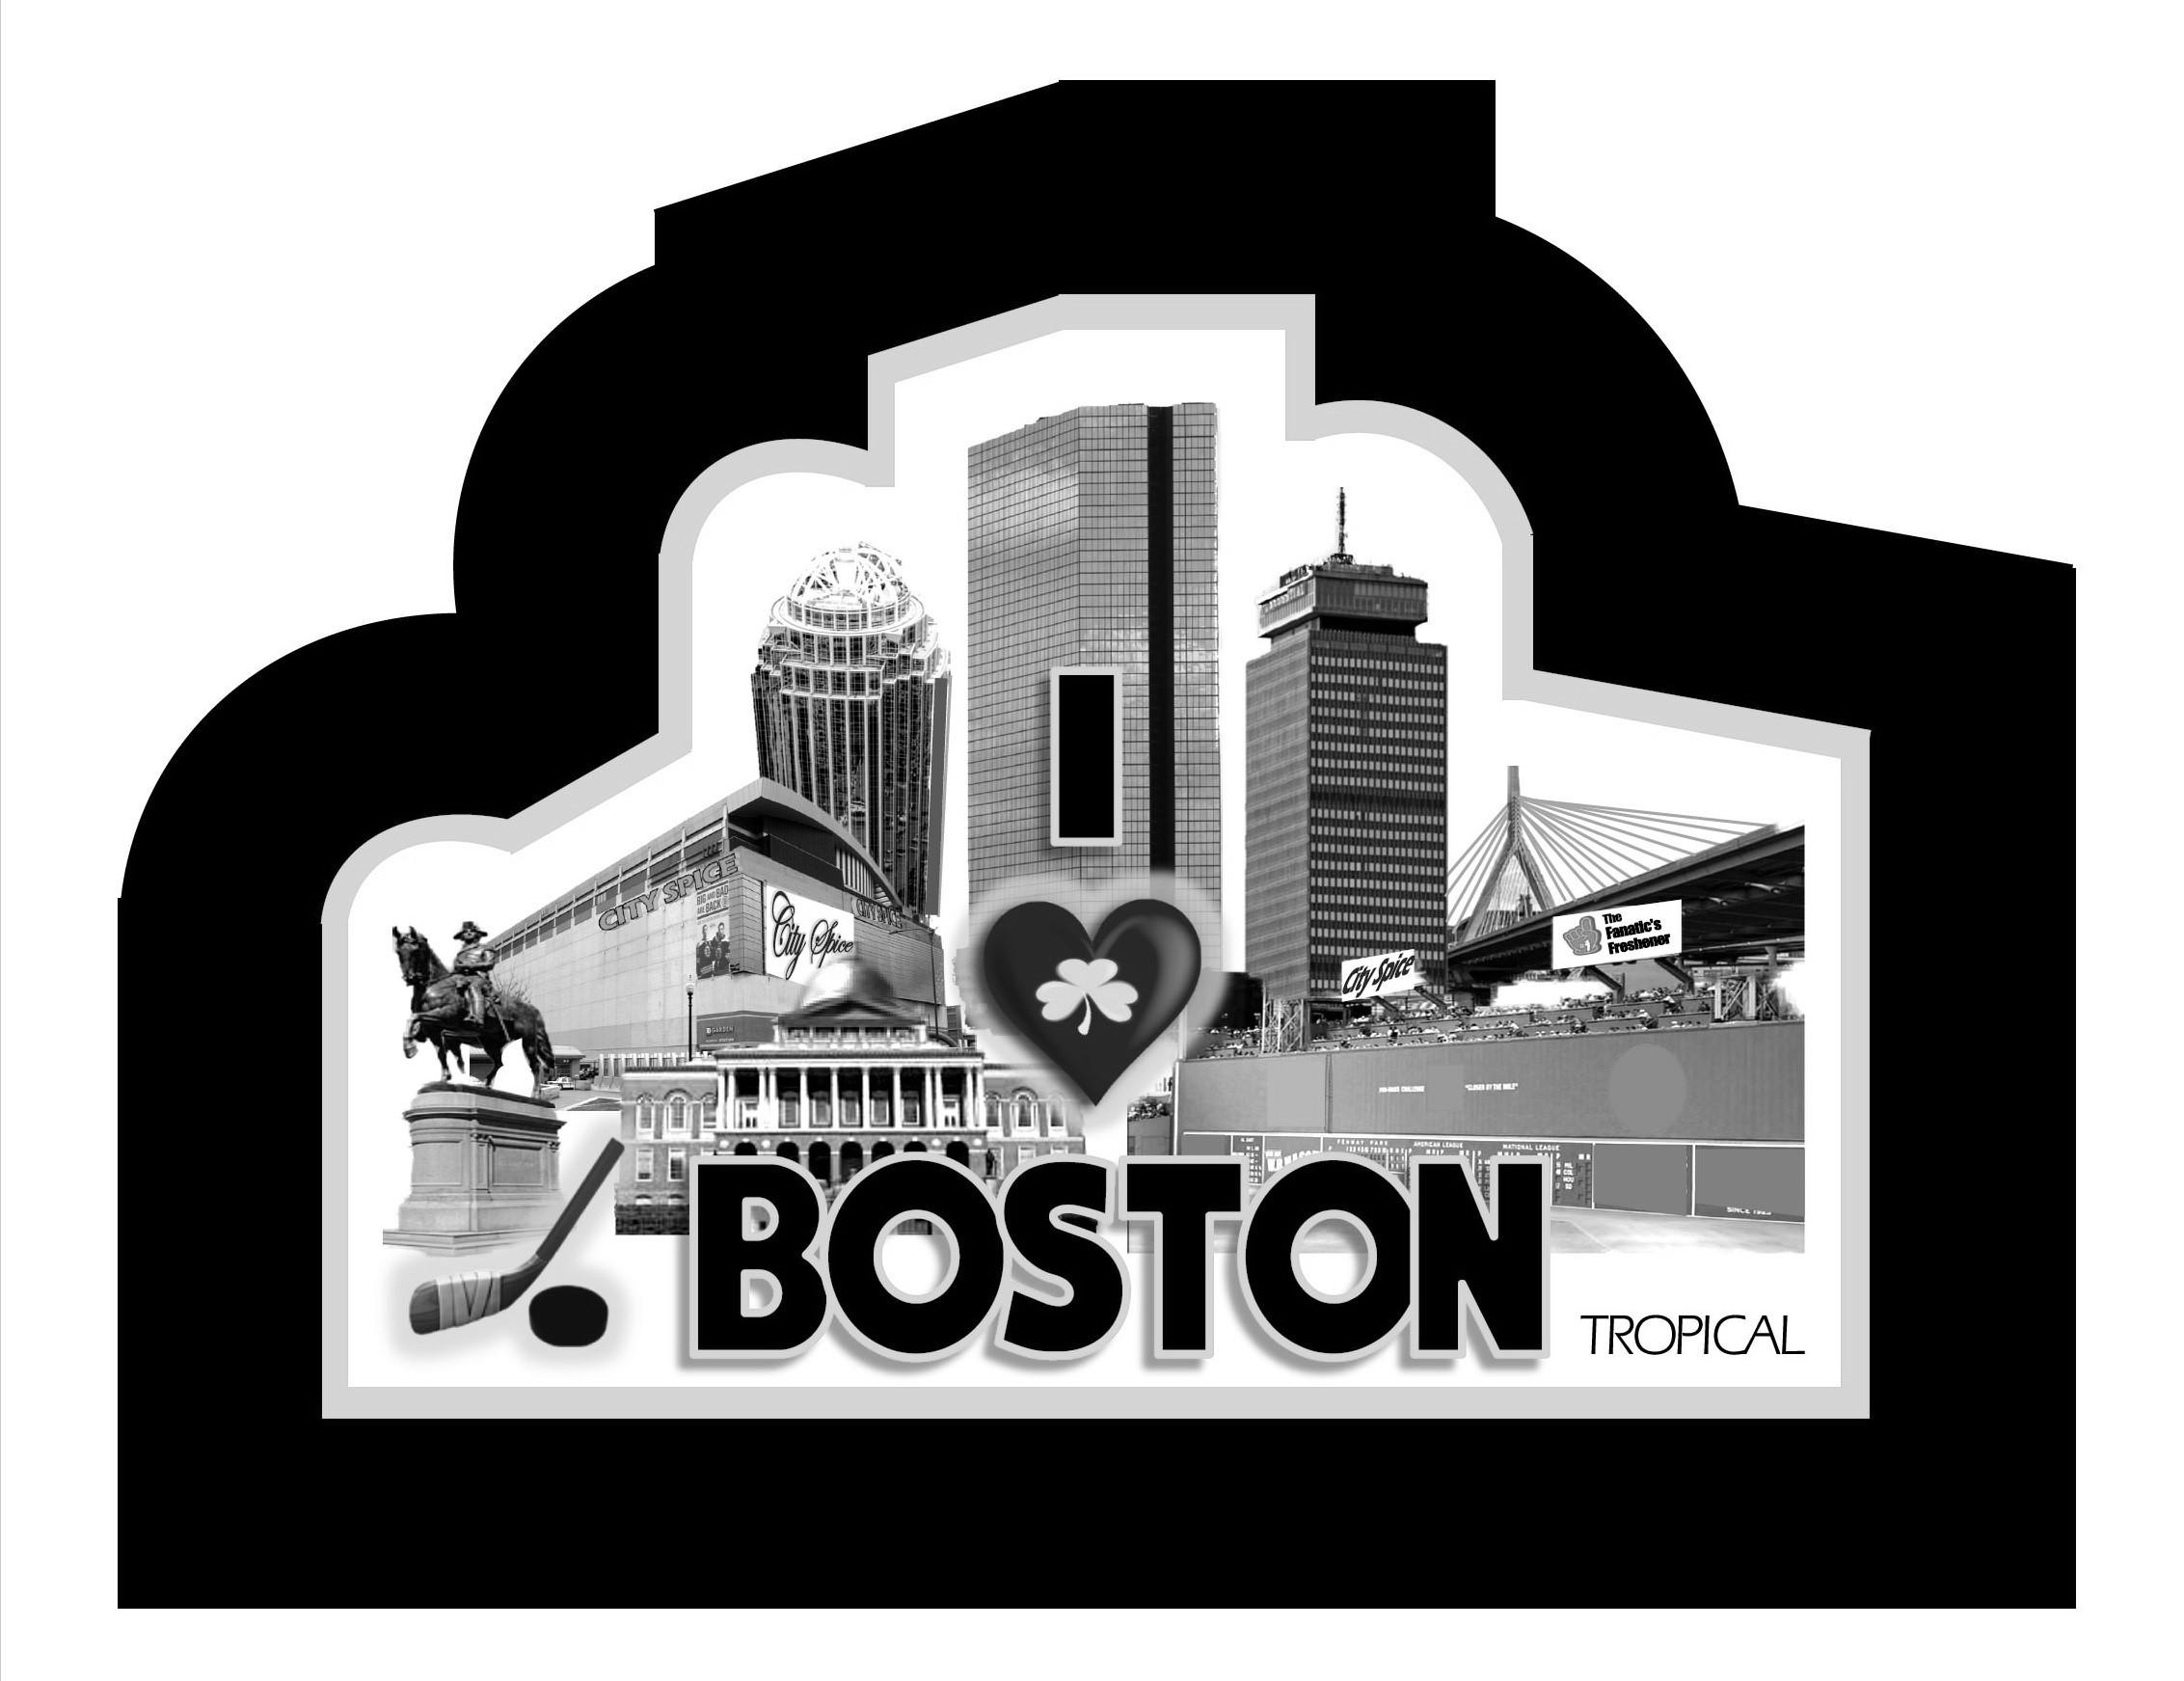  I BOSTON TROPICAL CITY SPICE BIG AND BAD ARE BACK THE FANATIC'S FRESHENER